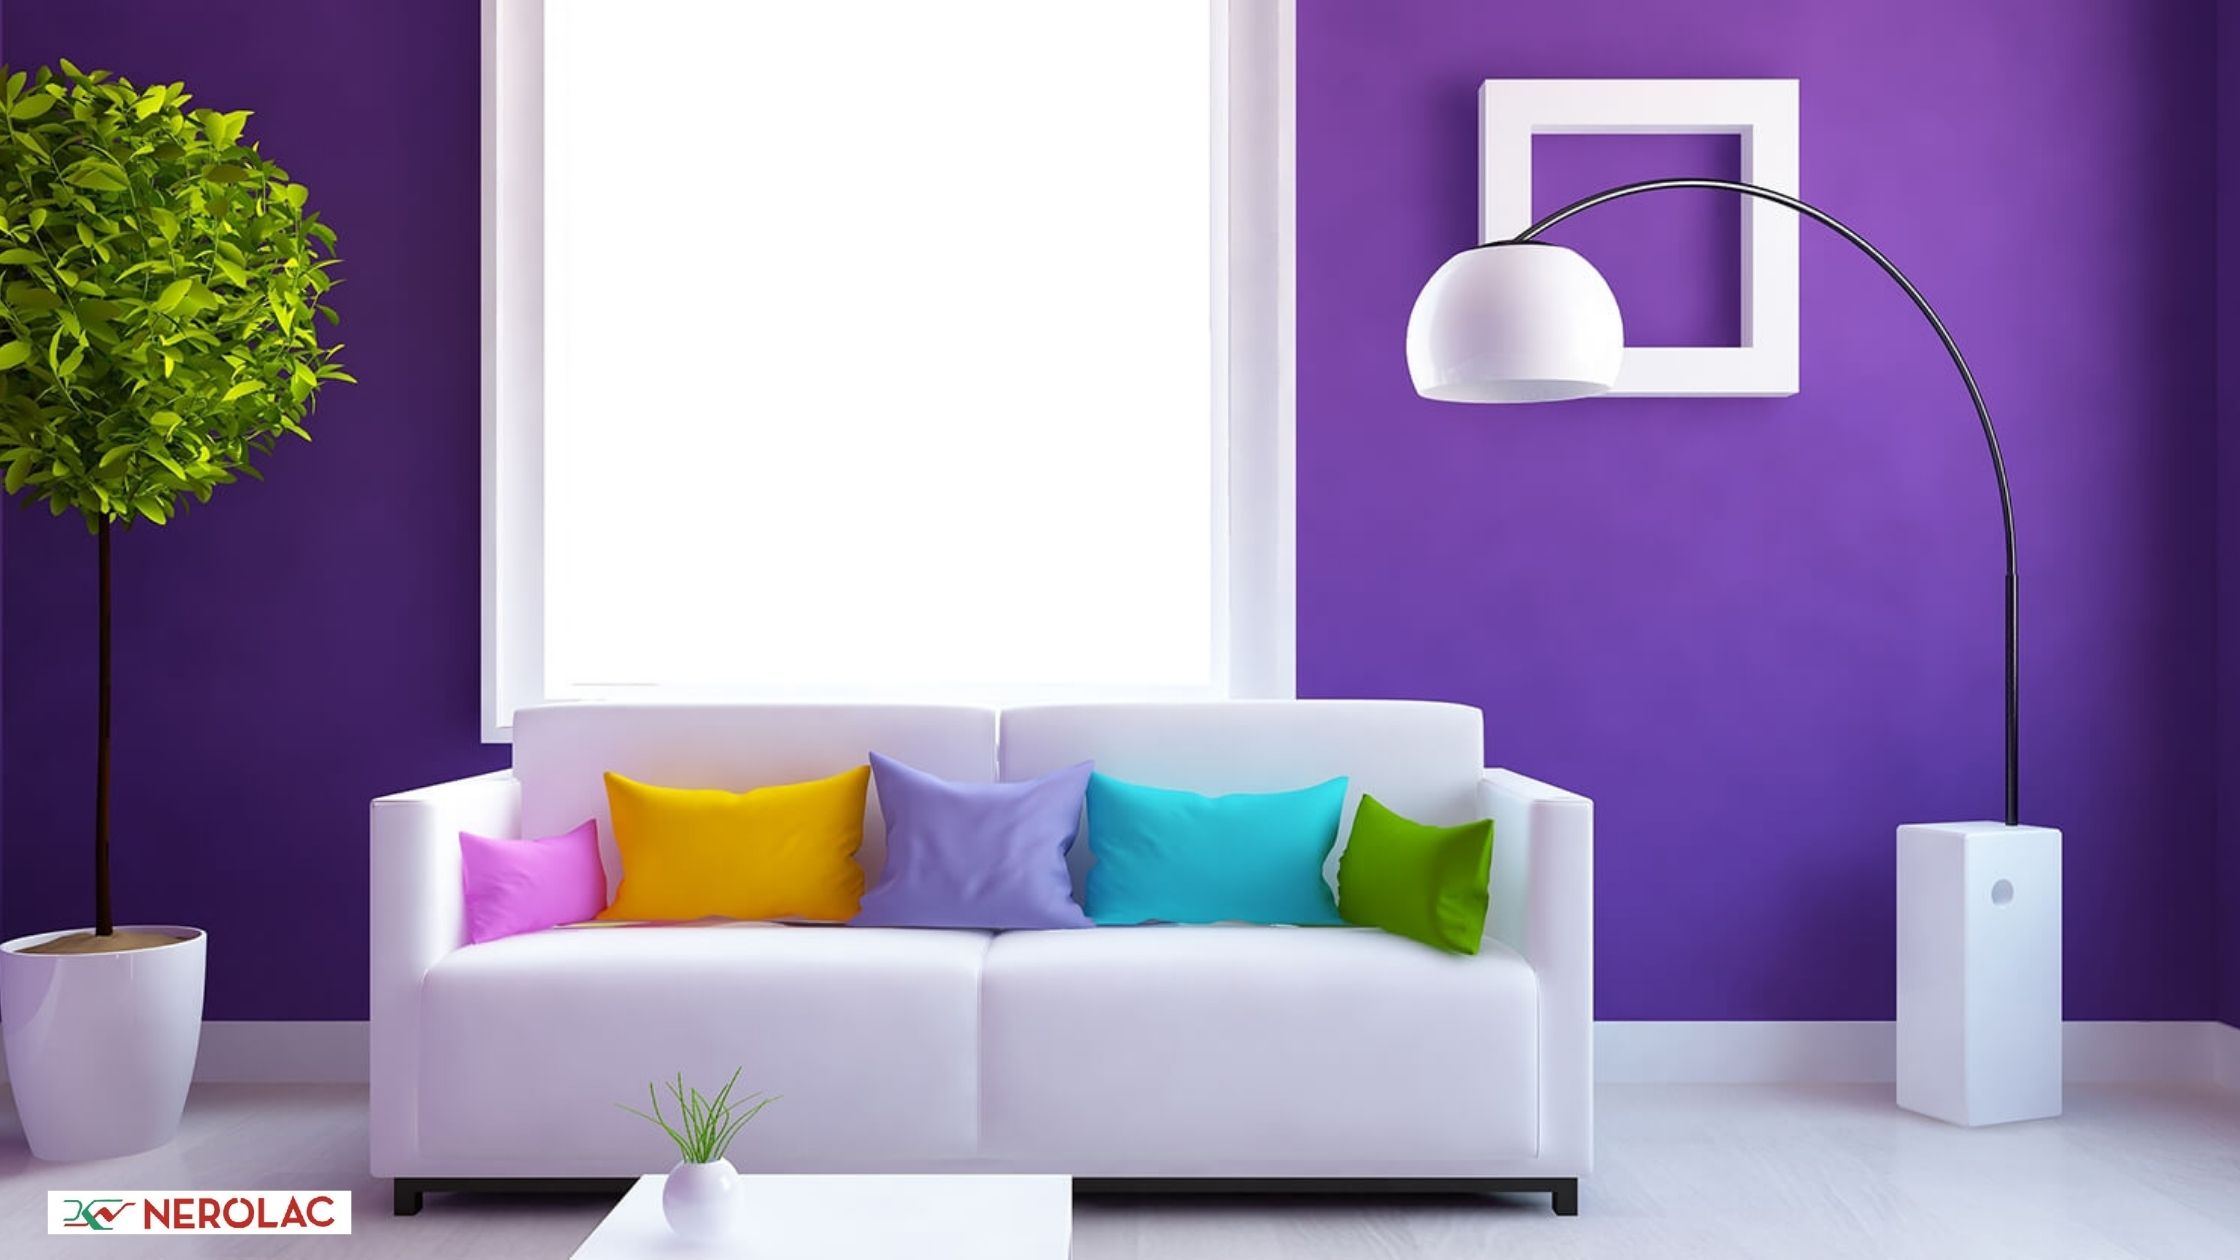 Asian paints vs Nerolac vs Berger vs Dulux - Which One Is Better?